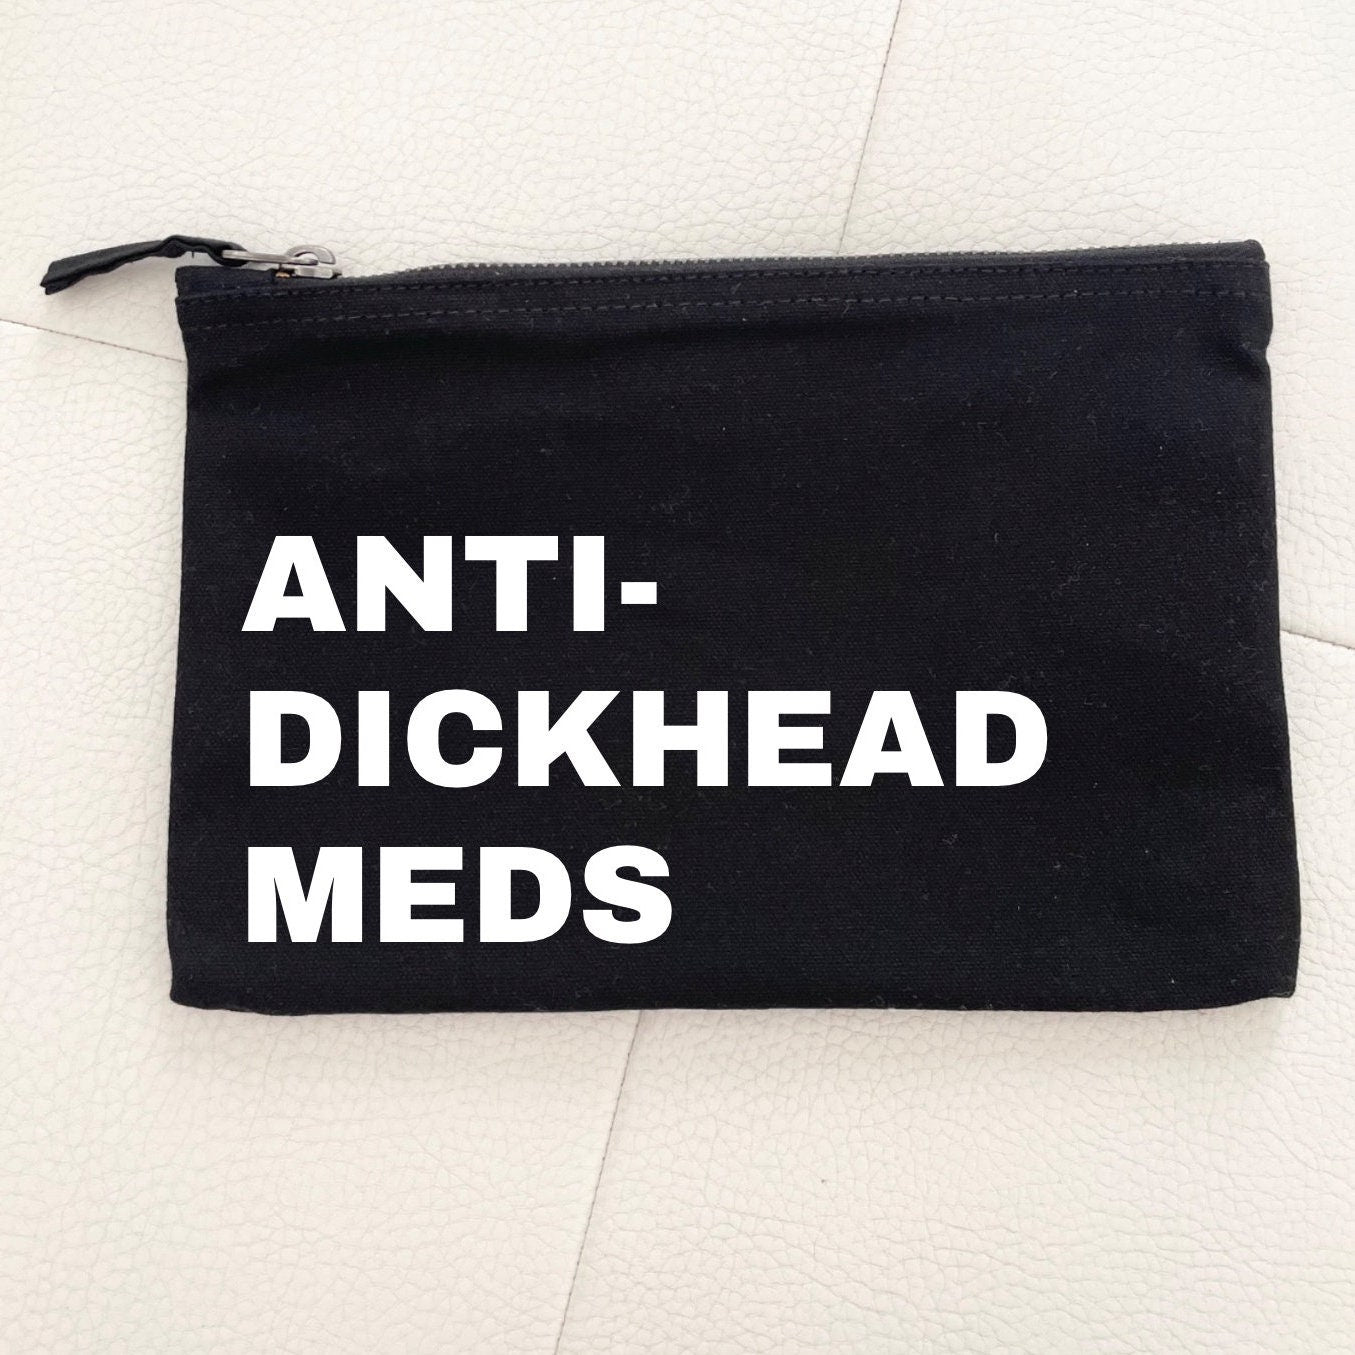 Anti-dickhead meds pouch, mental health medication pouch for home and work, antidepressant anti-pyscho tablet case